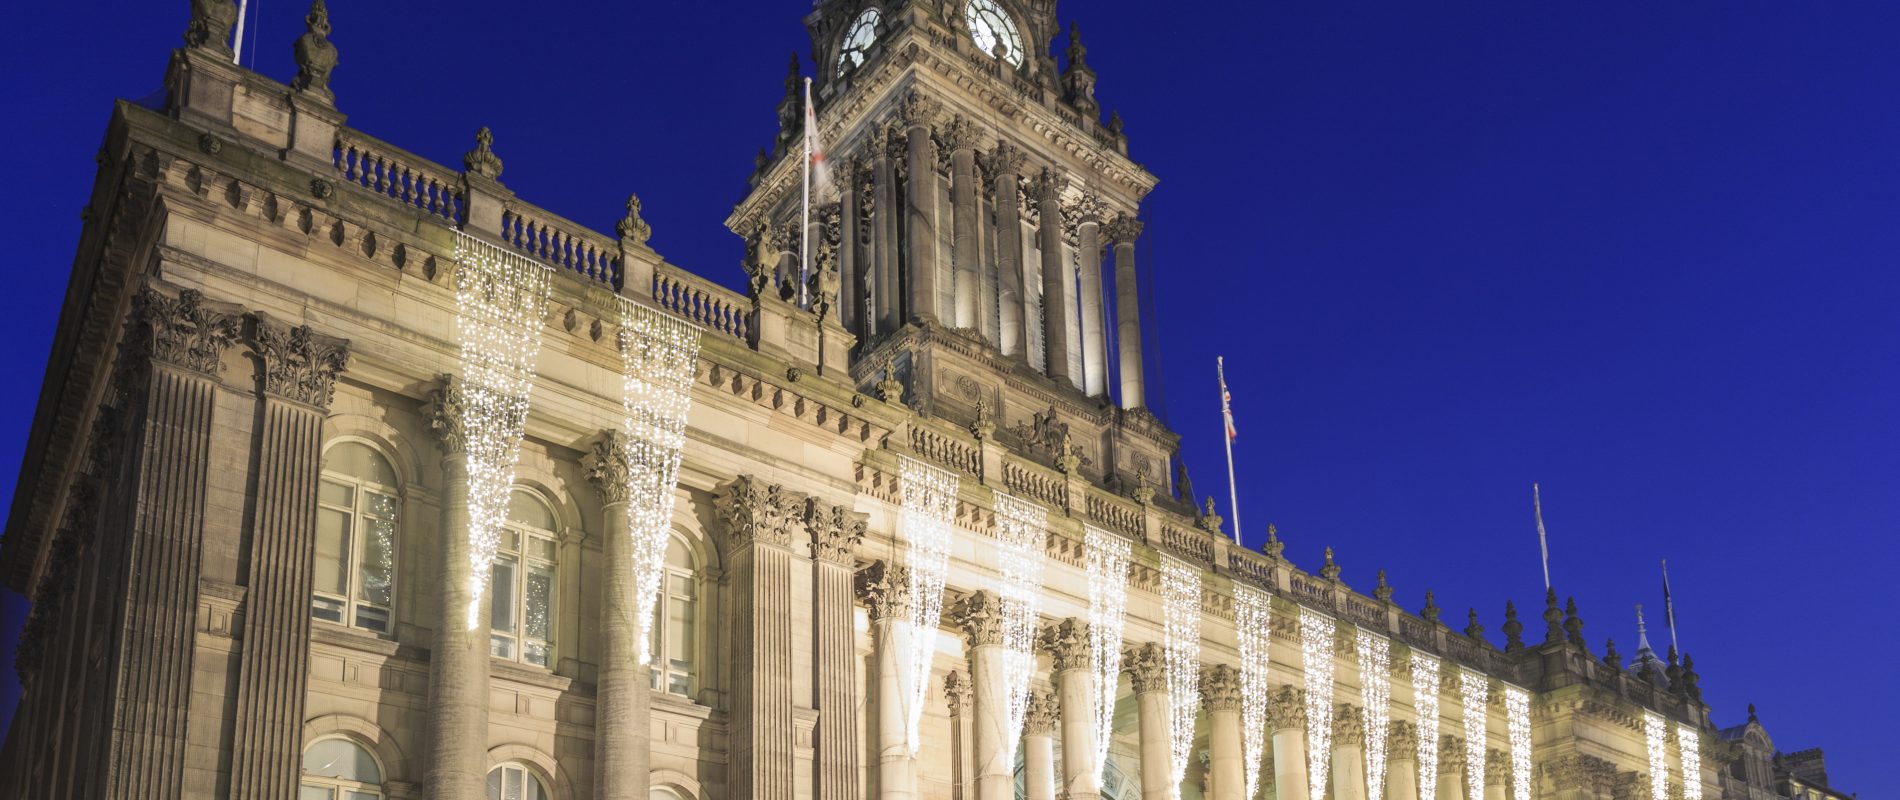 Leeds Town Hall at night - government fire protection